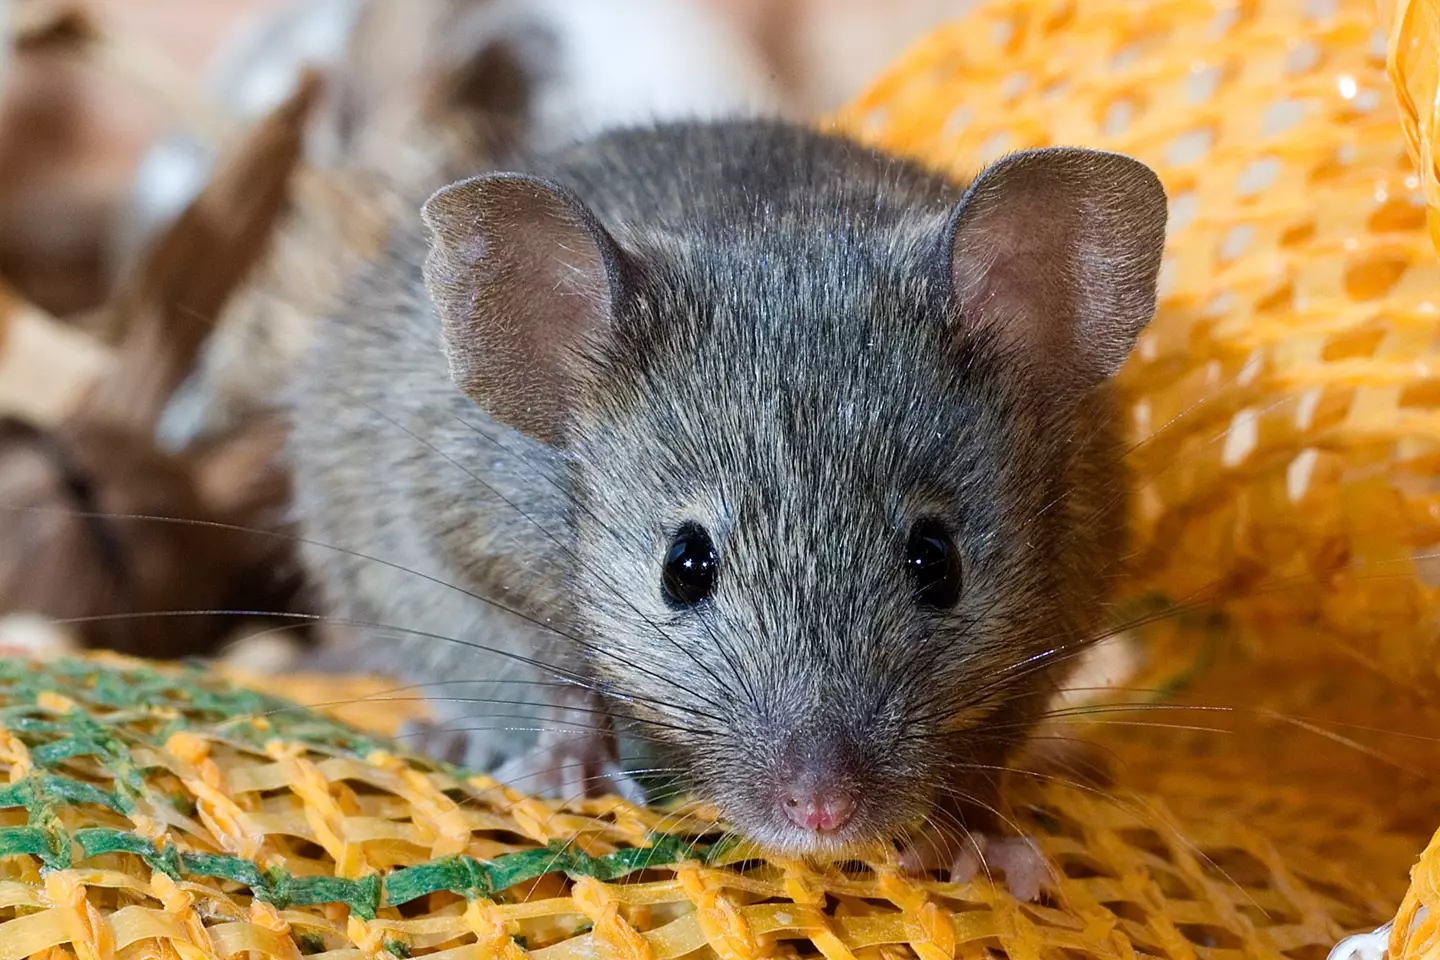 Rodents can spread diseases.